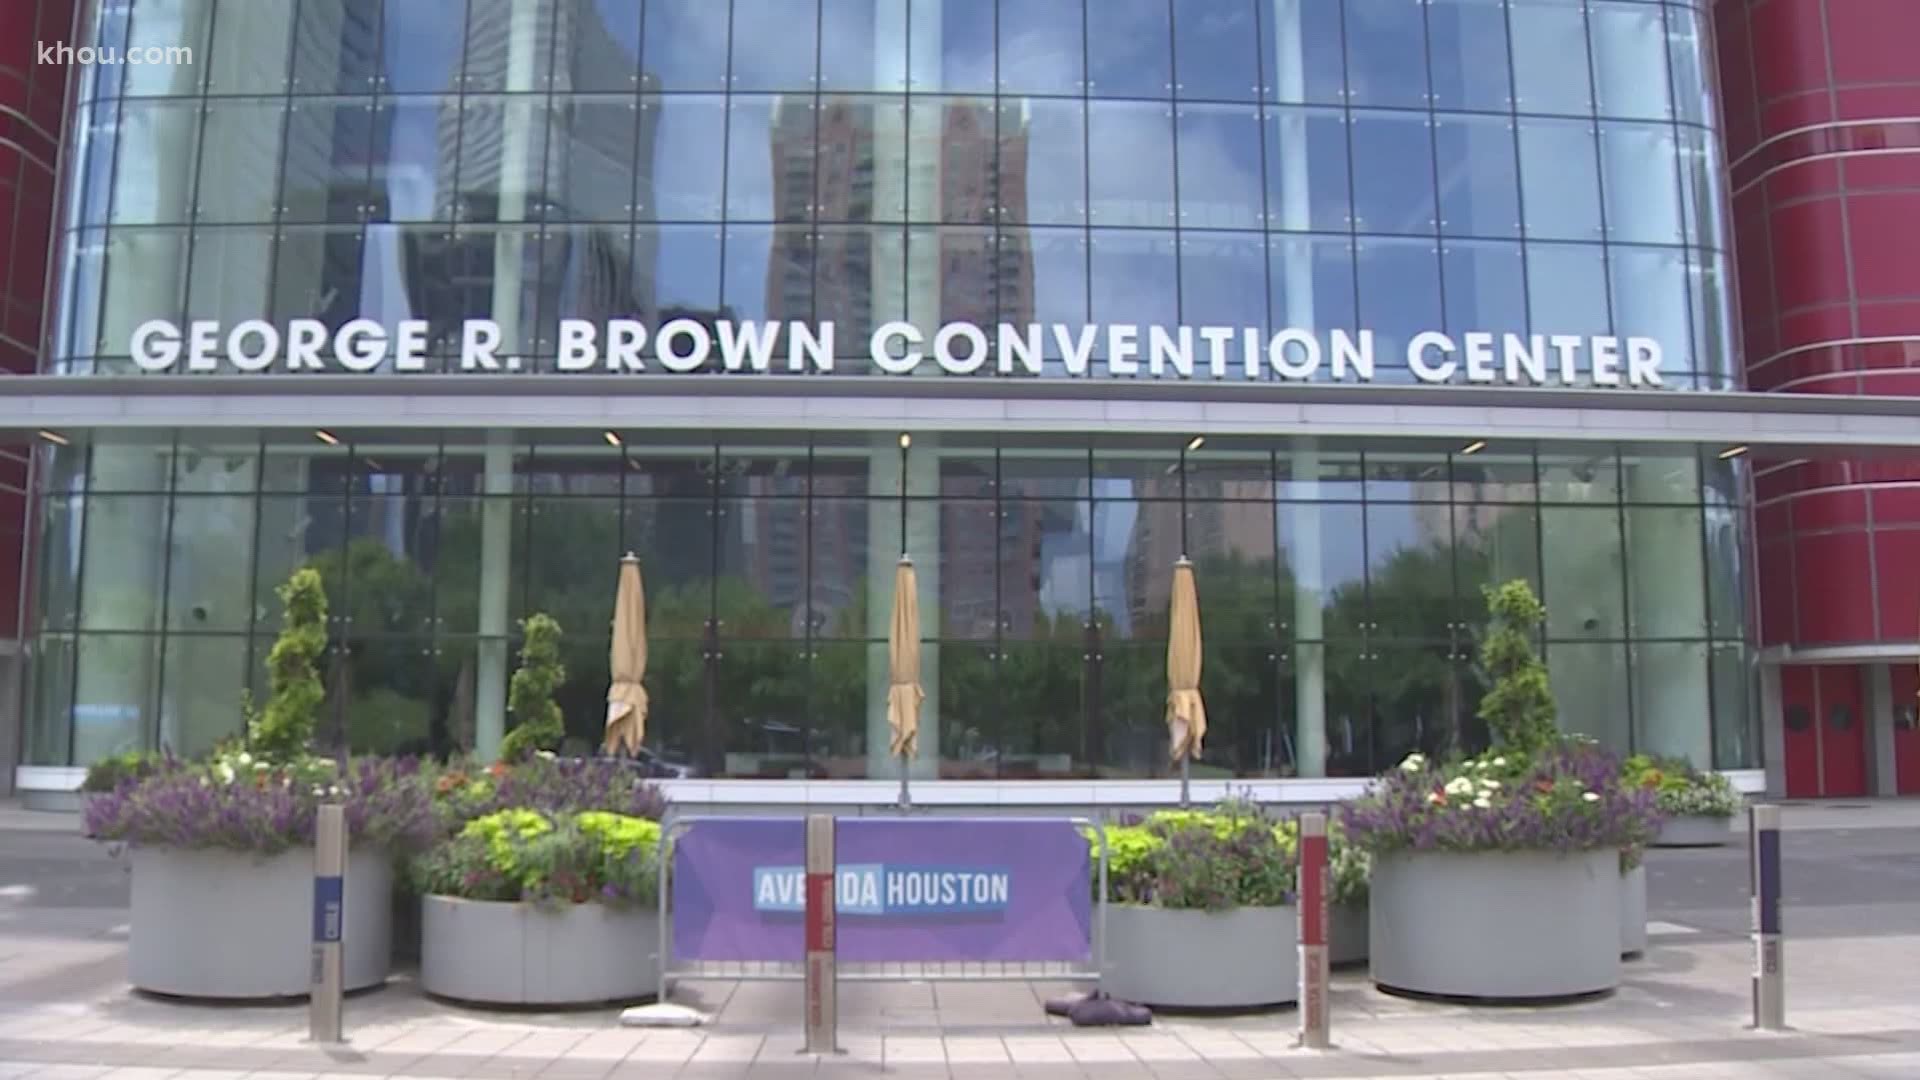 The upcoming state Republican convention in Houston has been canceled, Mayor Sylvester Turner announced Wednesday.